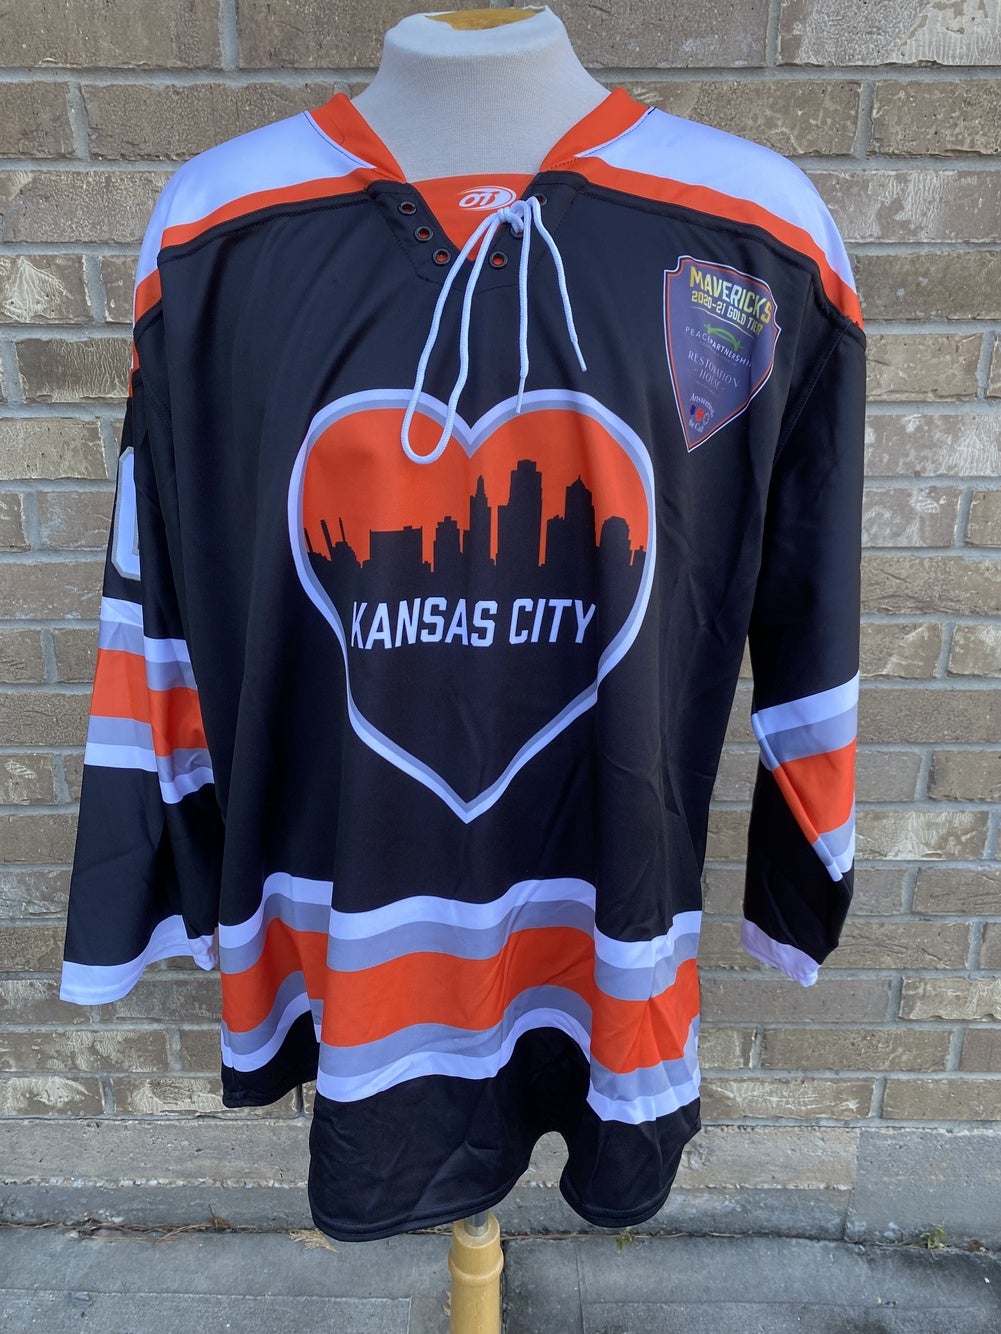 Utica Comets, Canucks Jerseys - collectibles - by owner - sale - craigslist